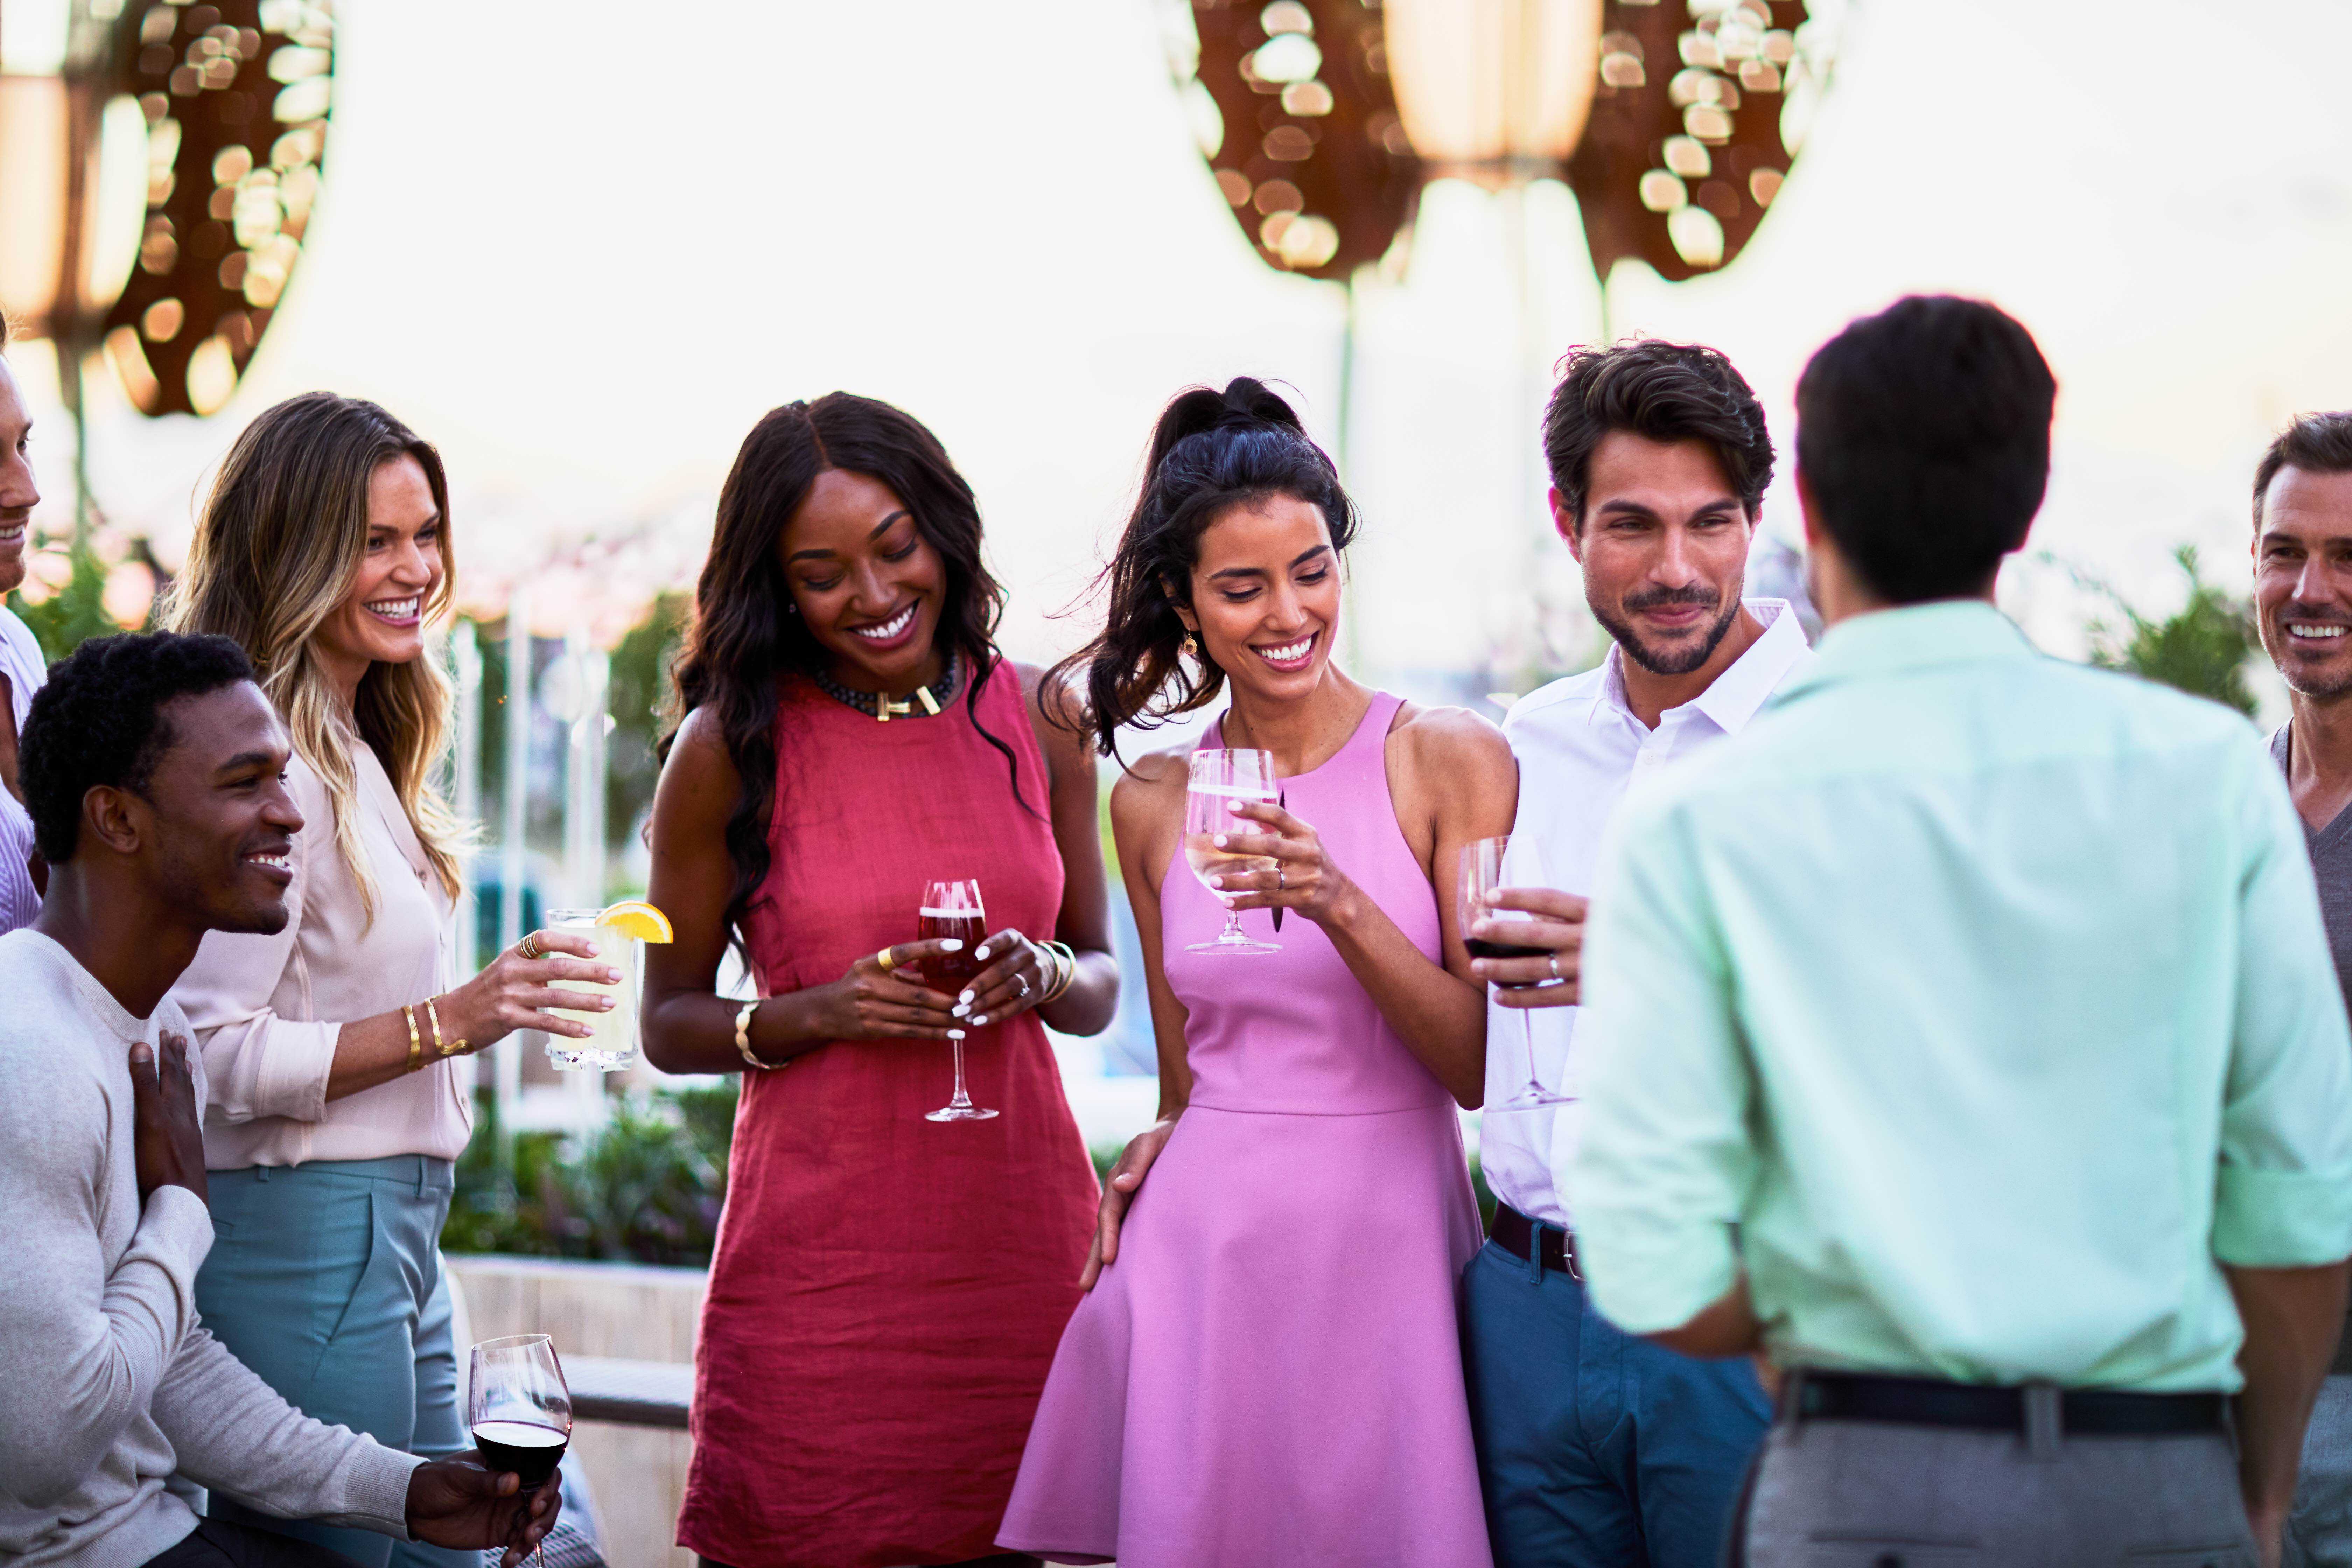 A mix of well-dressed people mingle with drinks.